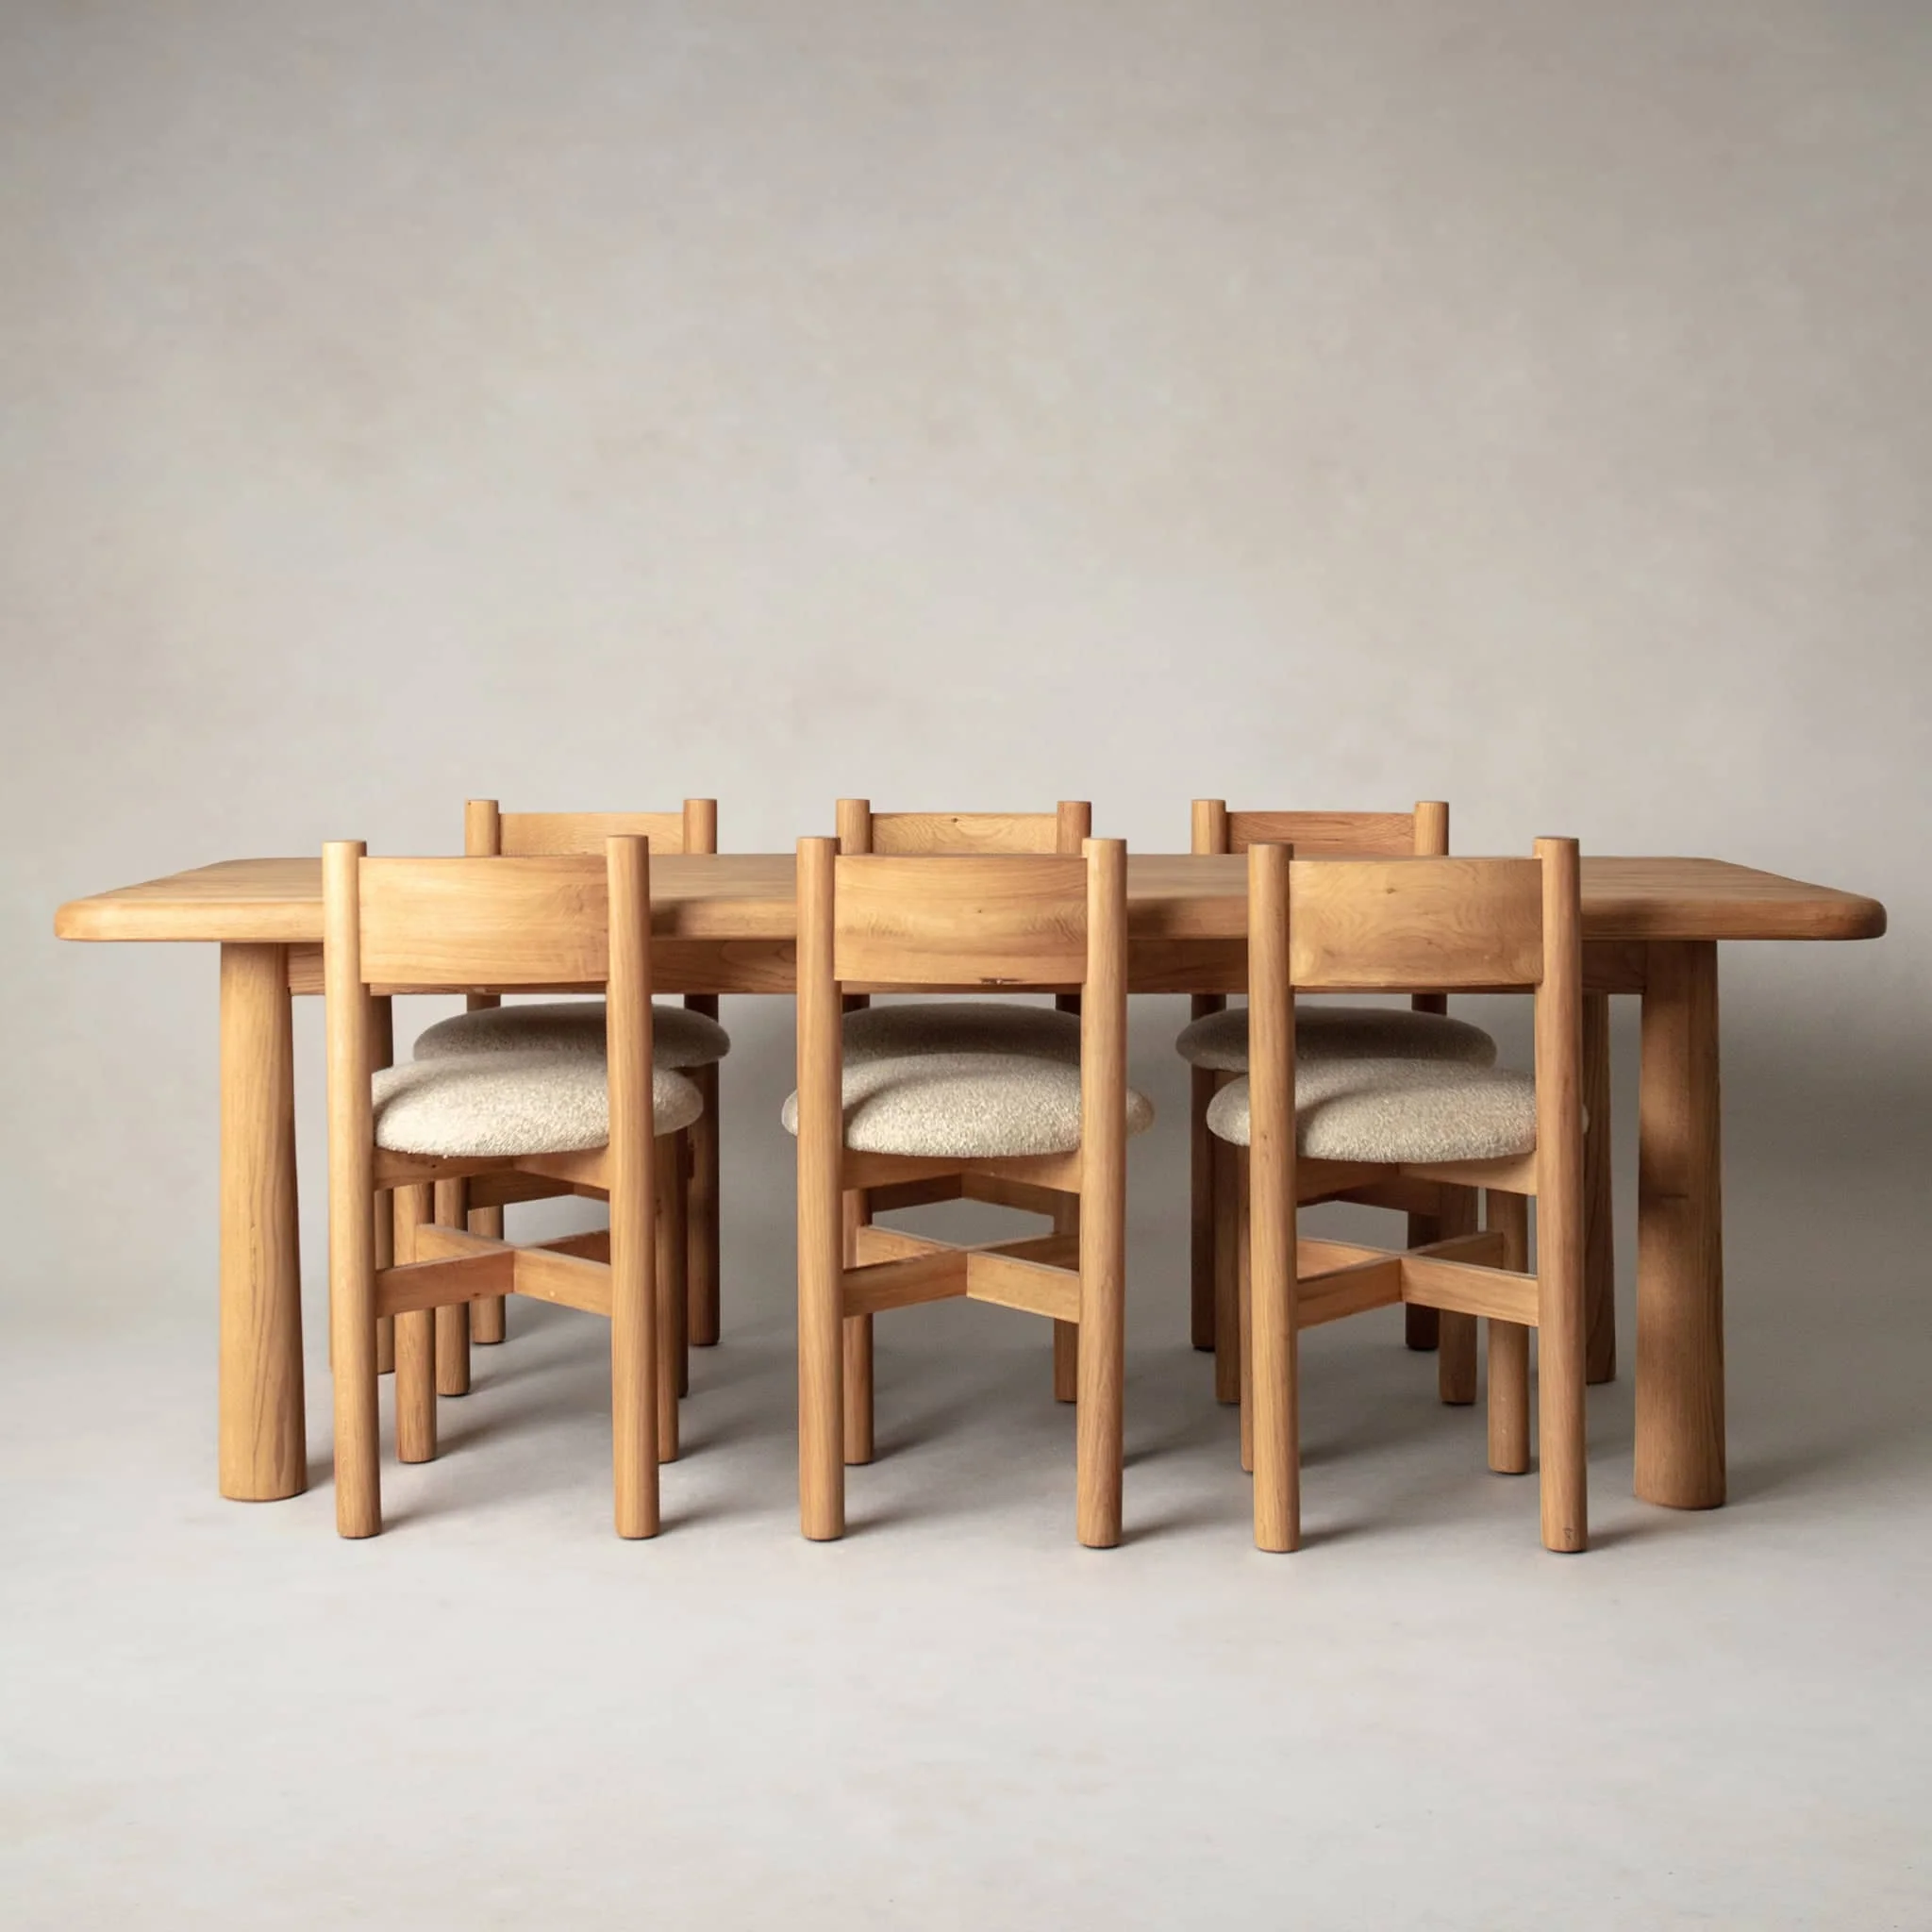 a group of wooden chairs sitting around a wooden table